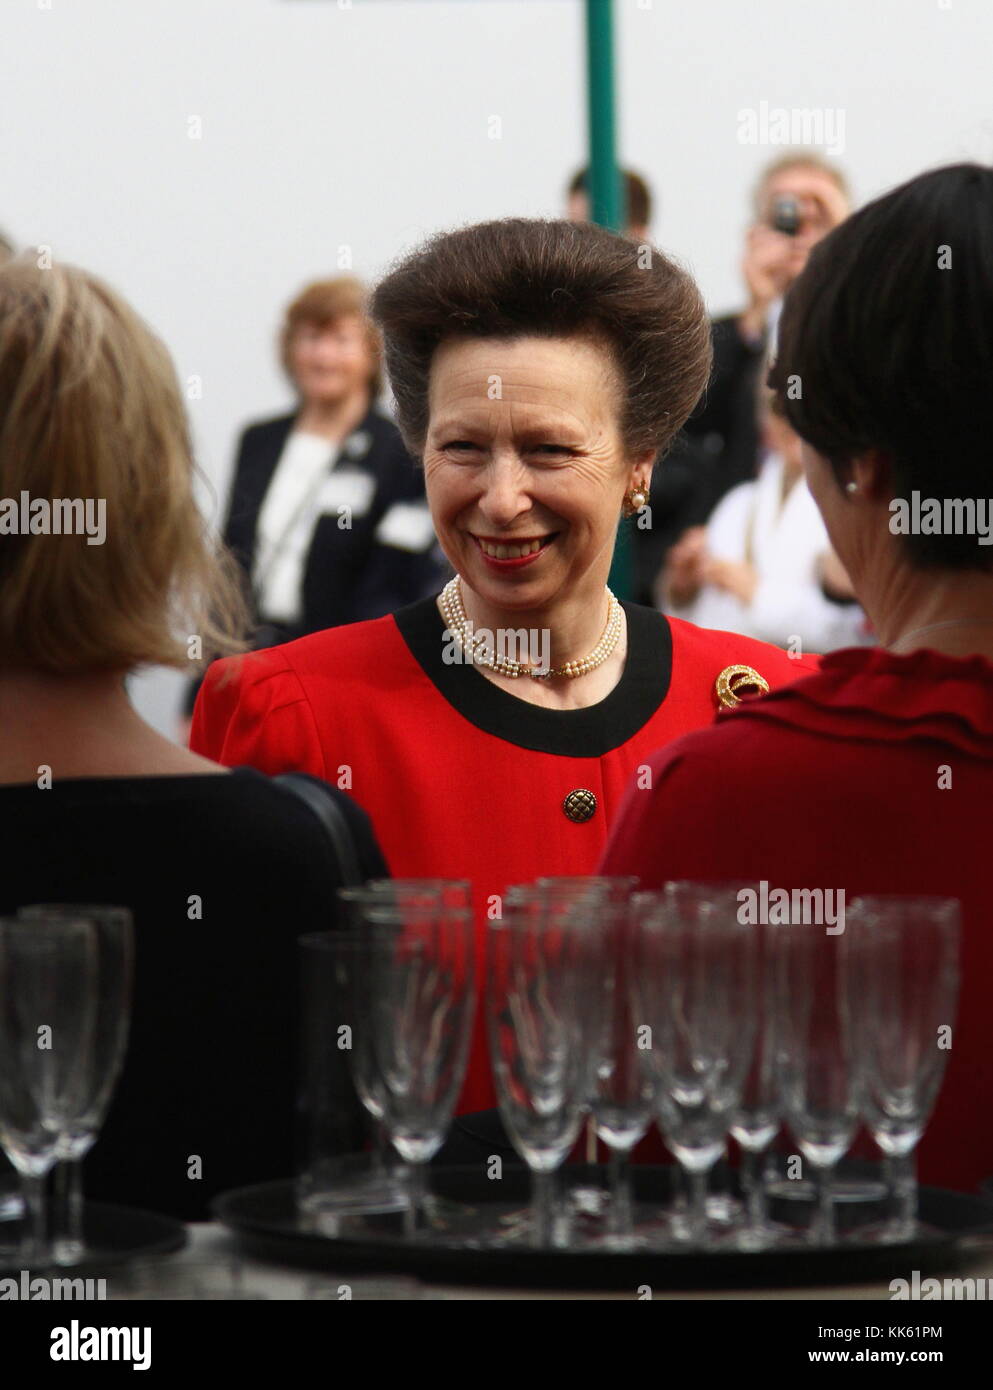 PRINCESS ANNE PRINCESS ROYAL ATTENDING THE RHS CHELSEA FLOWER SHOW ON PRESS DAY ON 21ST MAY 2012. Russell Moore portfolio page. Stock Photo